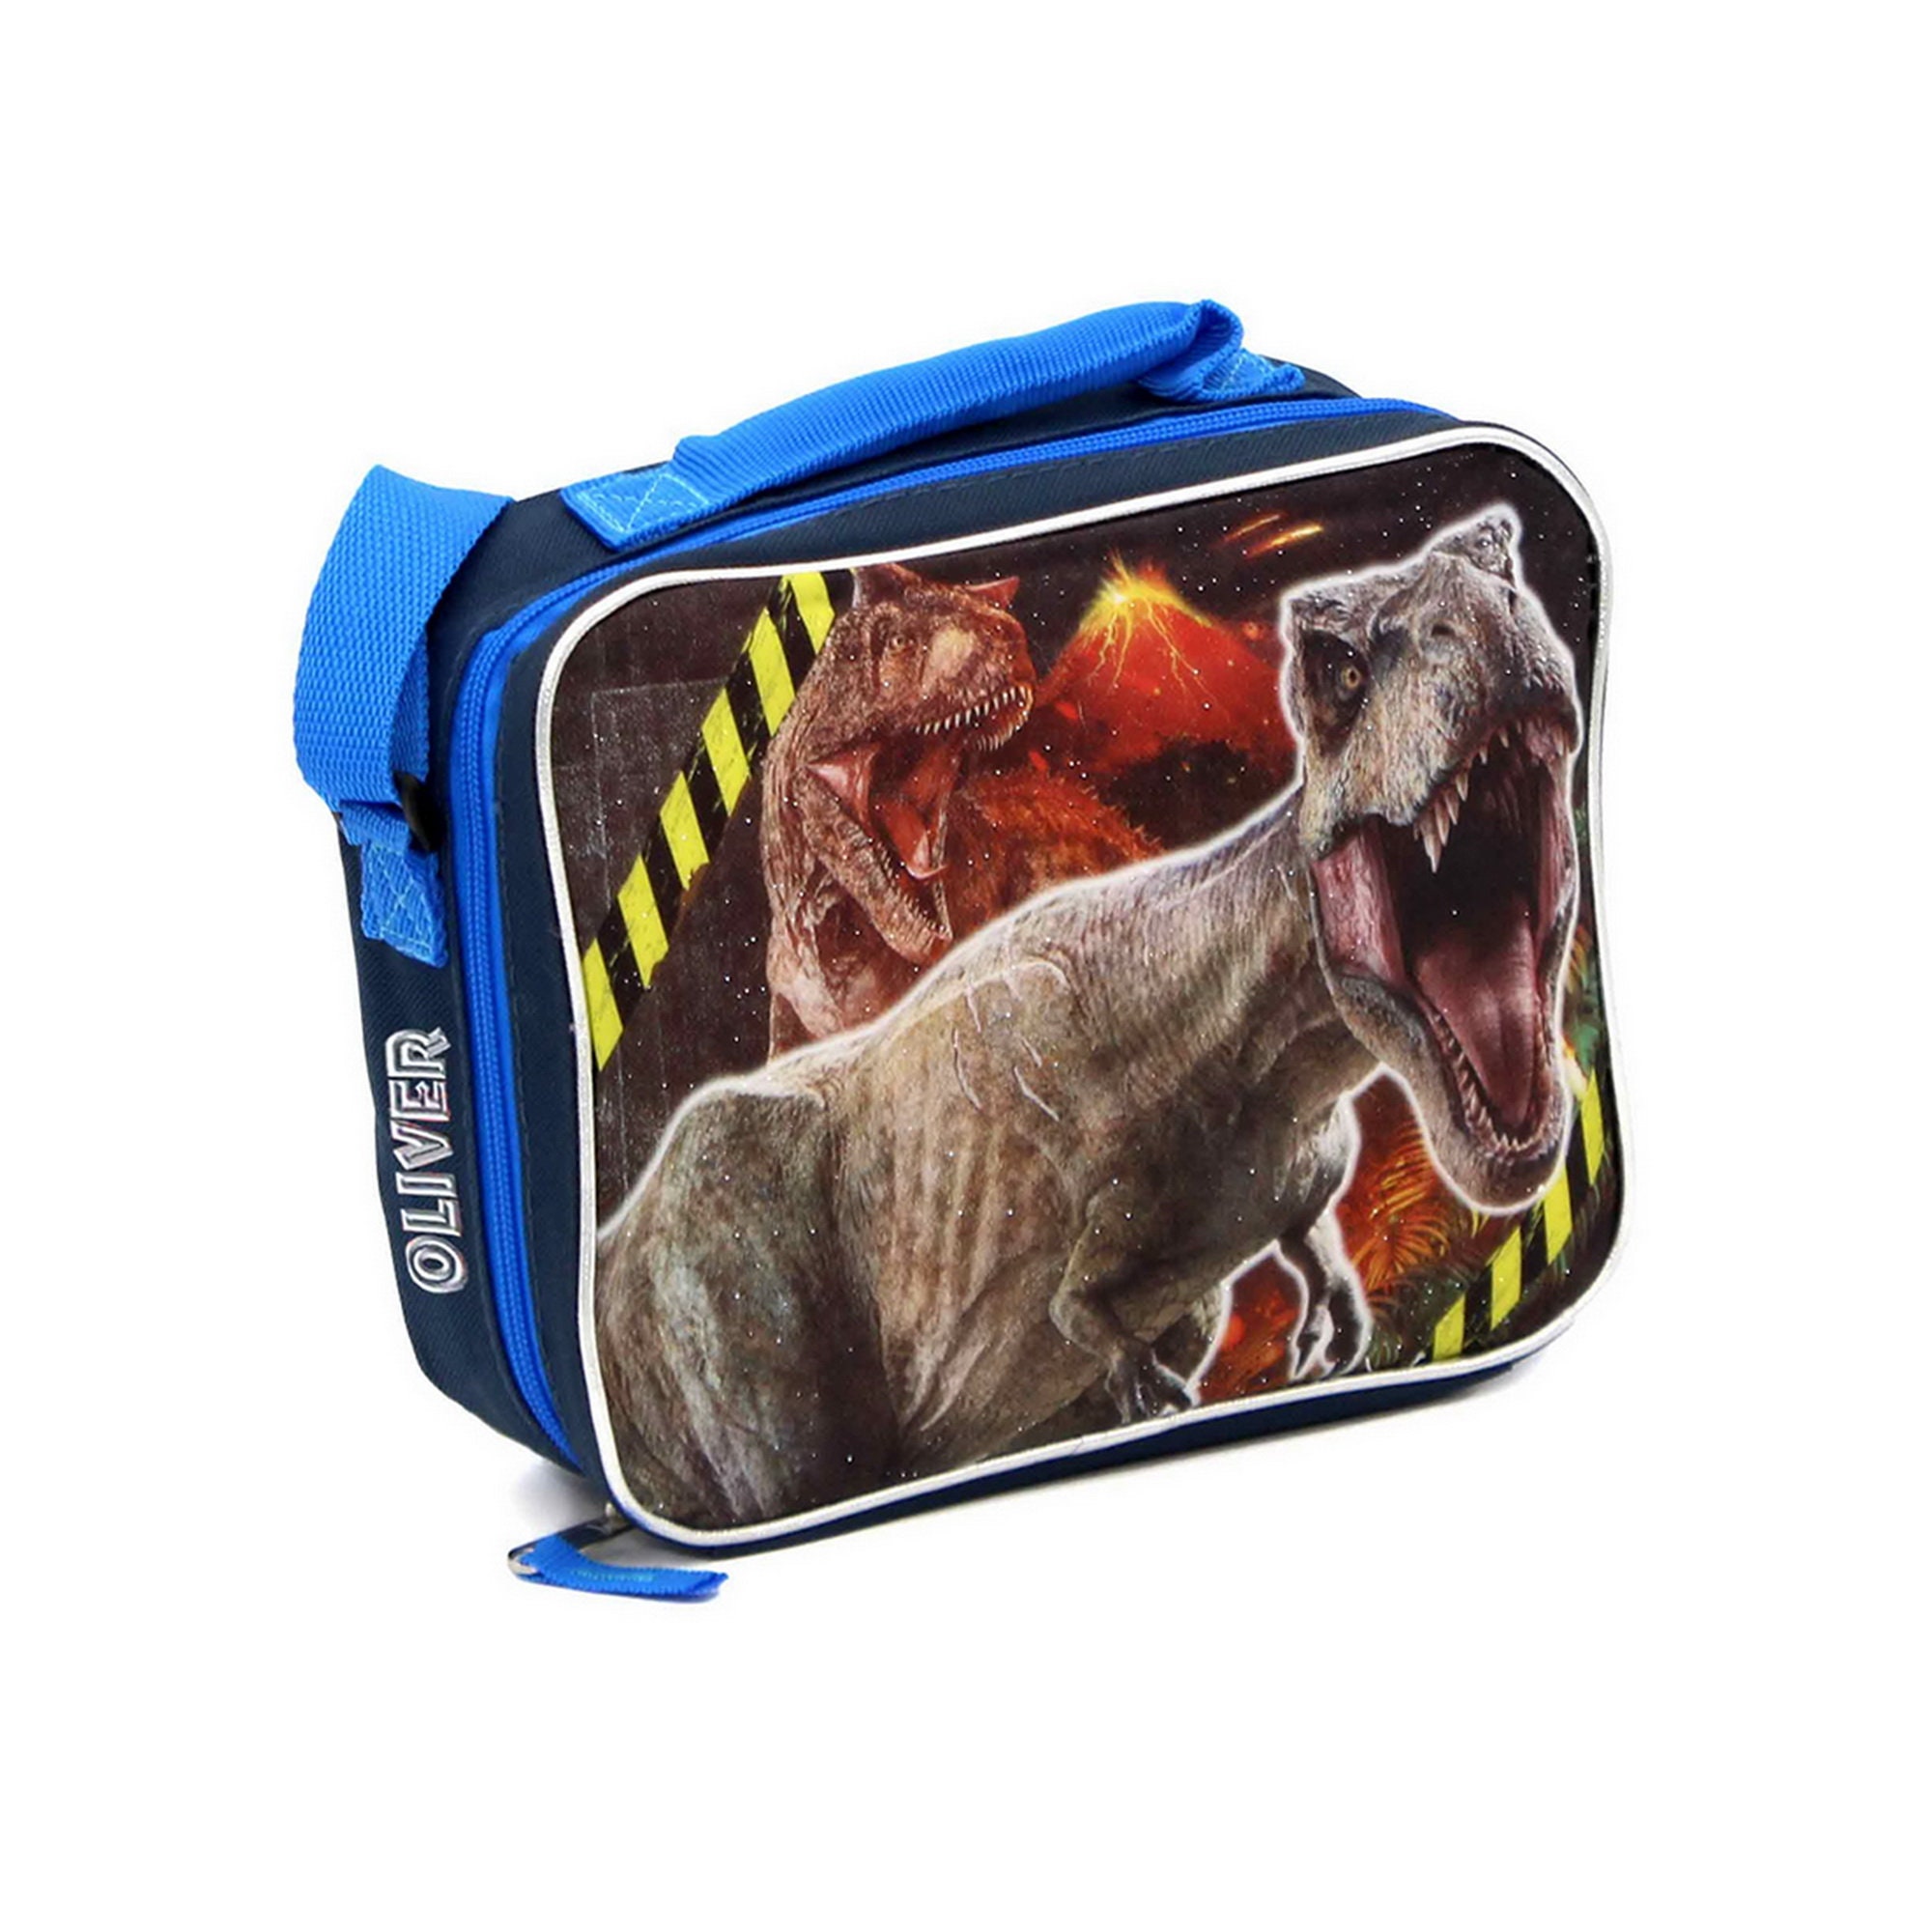 Fast Forward Jurassic Park Lunch Box Kids - Bundle with Dinosaur Lunch Box for Boys, Water Bottle, Stickers, More (T-Rex Lunch Bag)